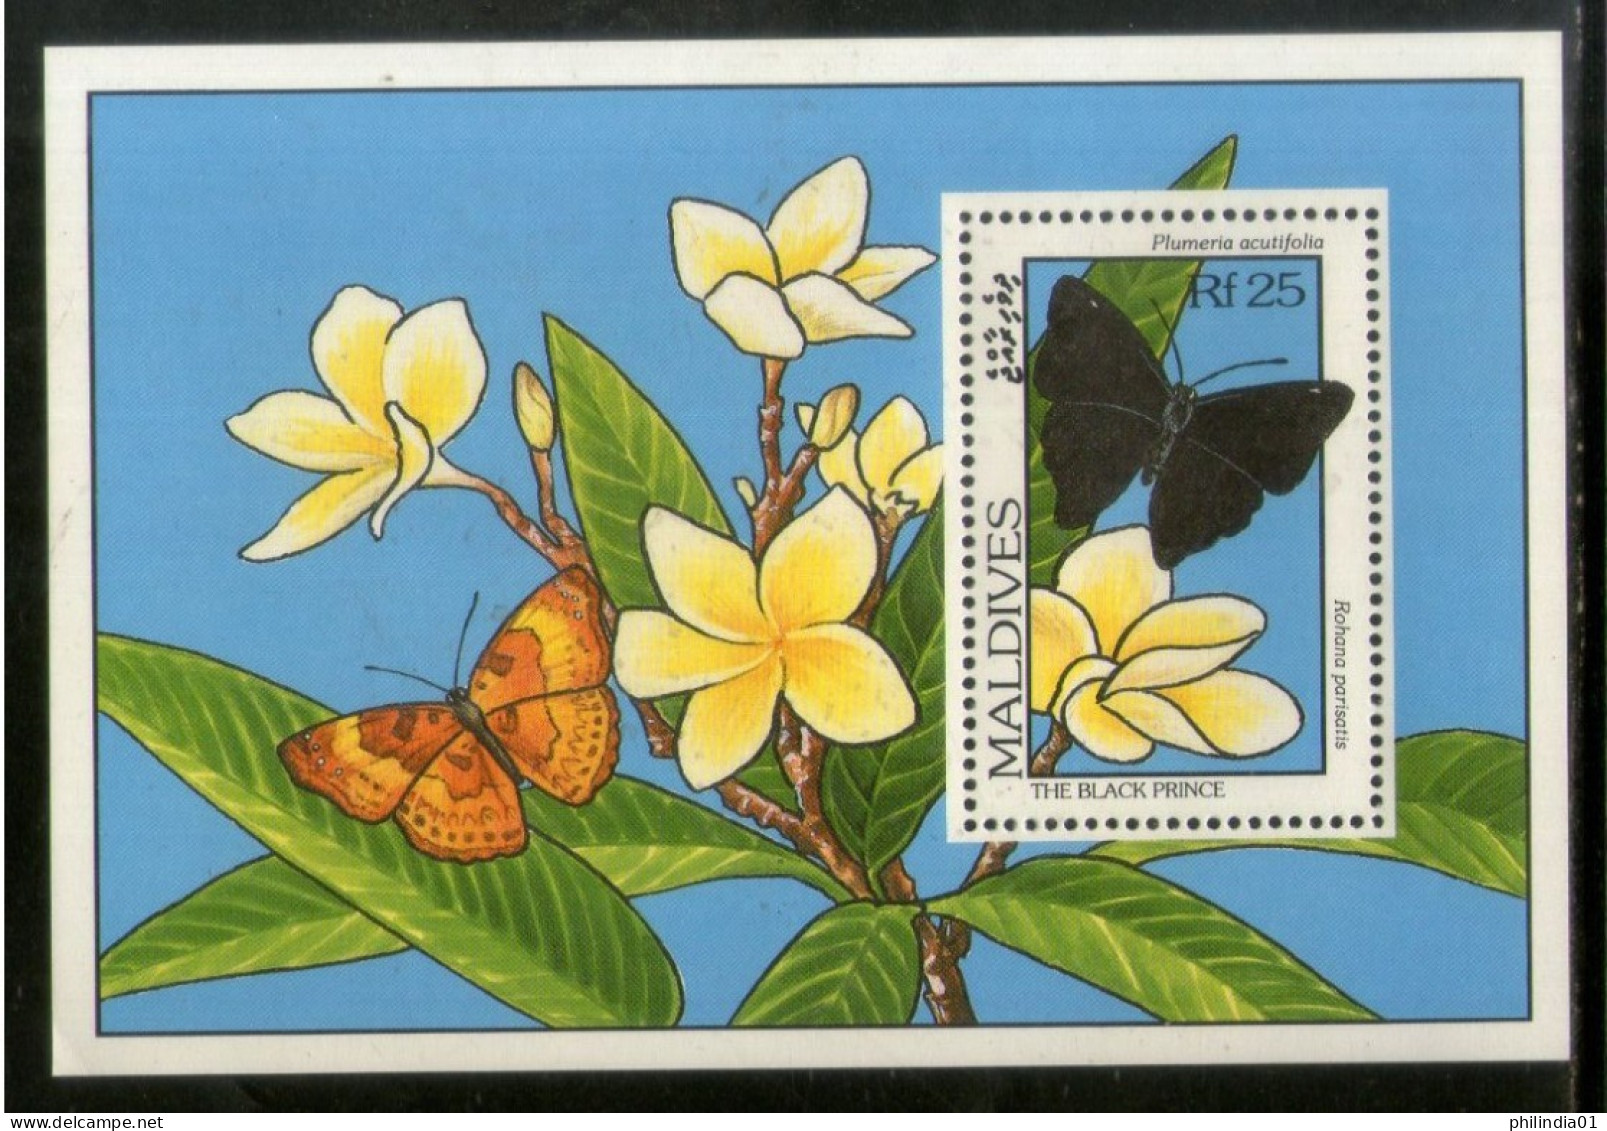 Maldives 1993 Black Prince Butterflies & Flowers Moth Insect Sc 1907 M/s MNH # 5293 - Papillons